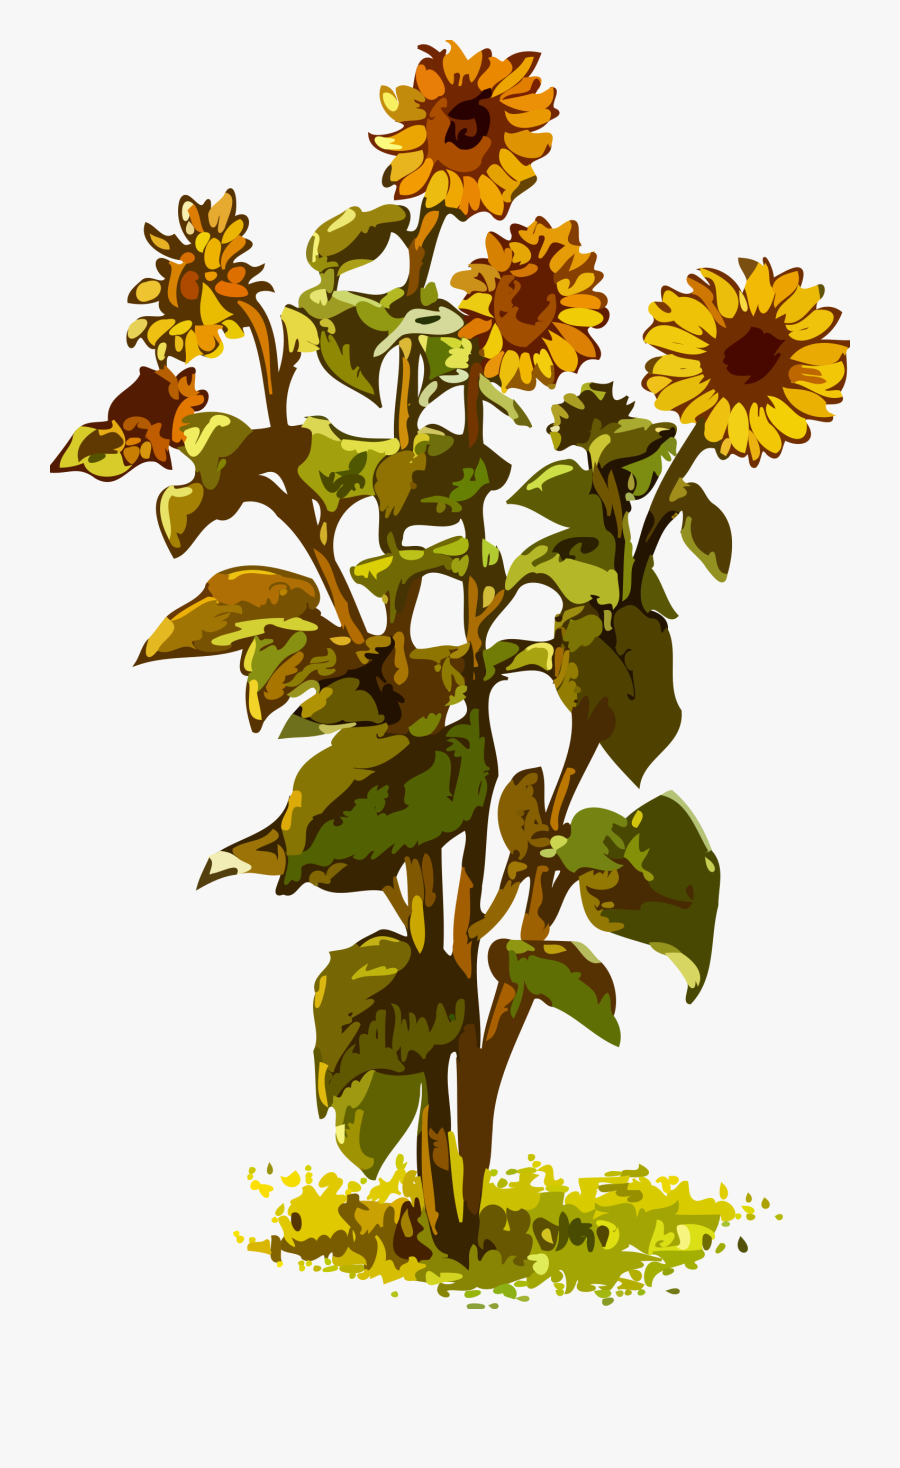 Sunflowers Clipart Marigold - Drawing Sunflowers, Transparent Clipart